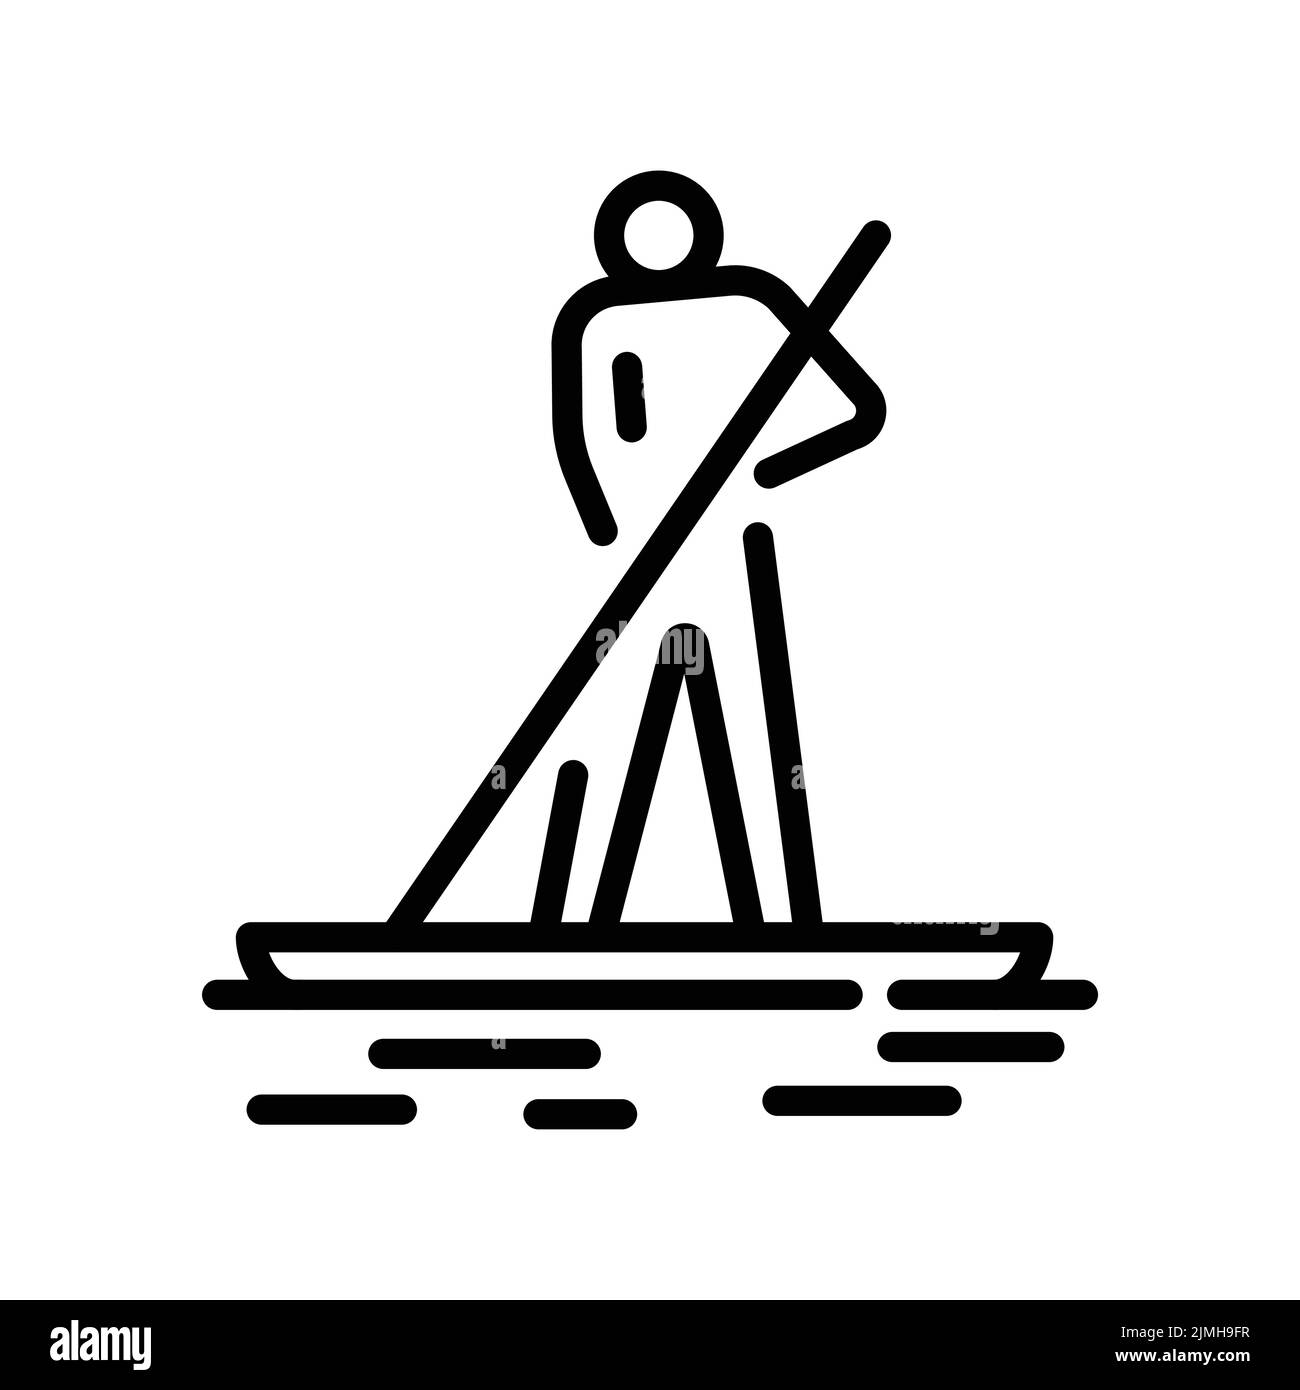 Paddleboarding black line icon. Water activity. Pictogram for web page. Stock Vector